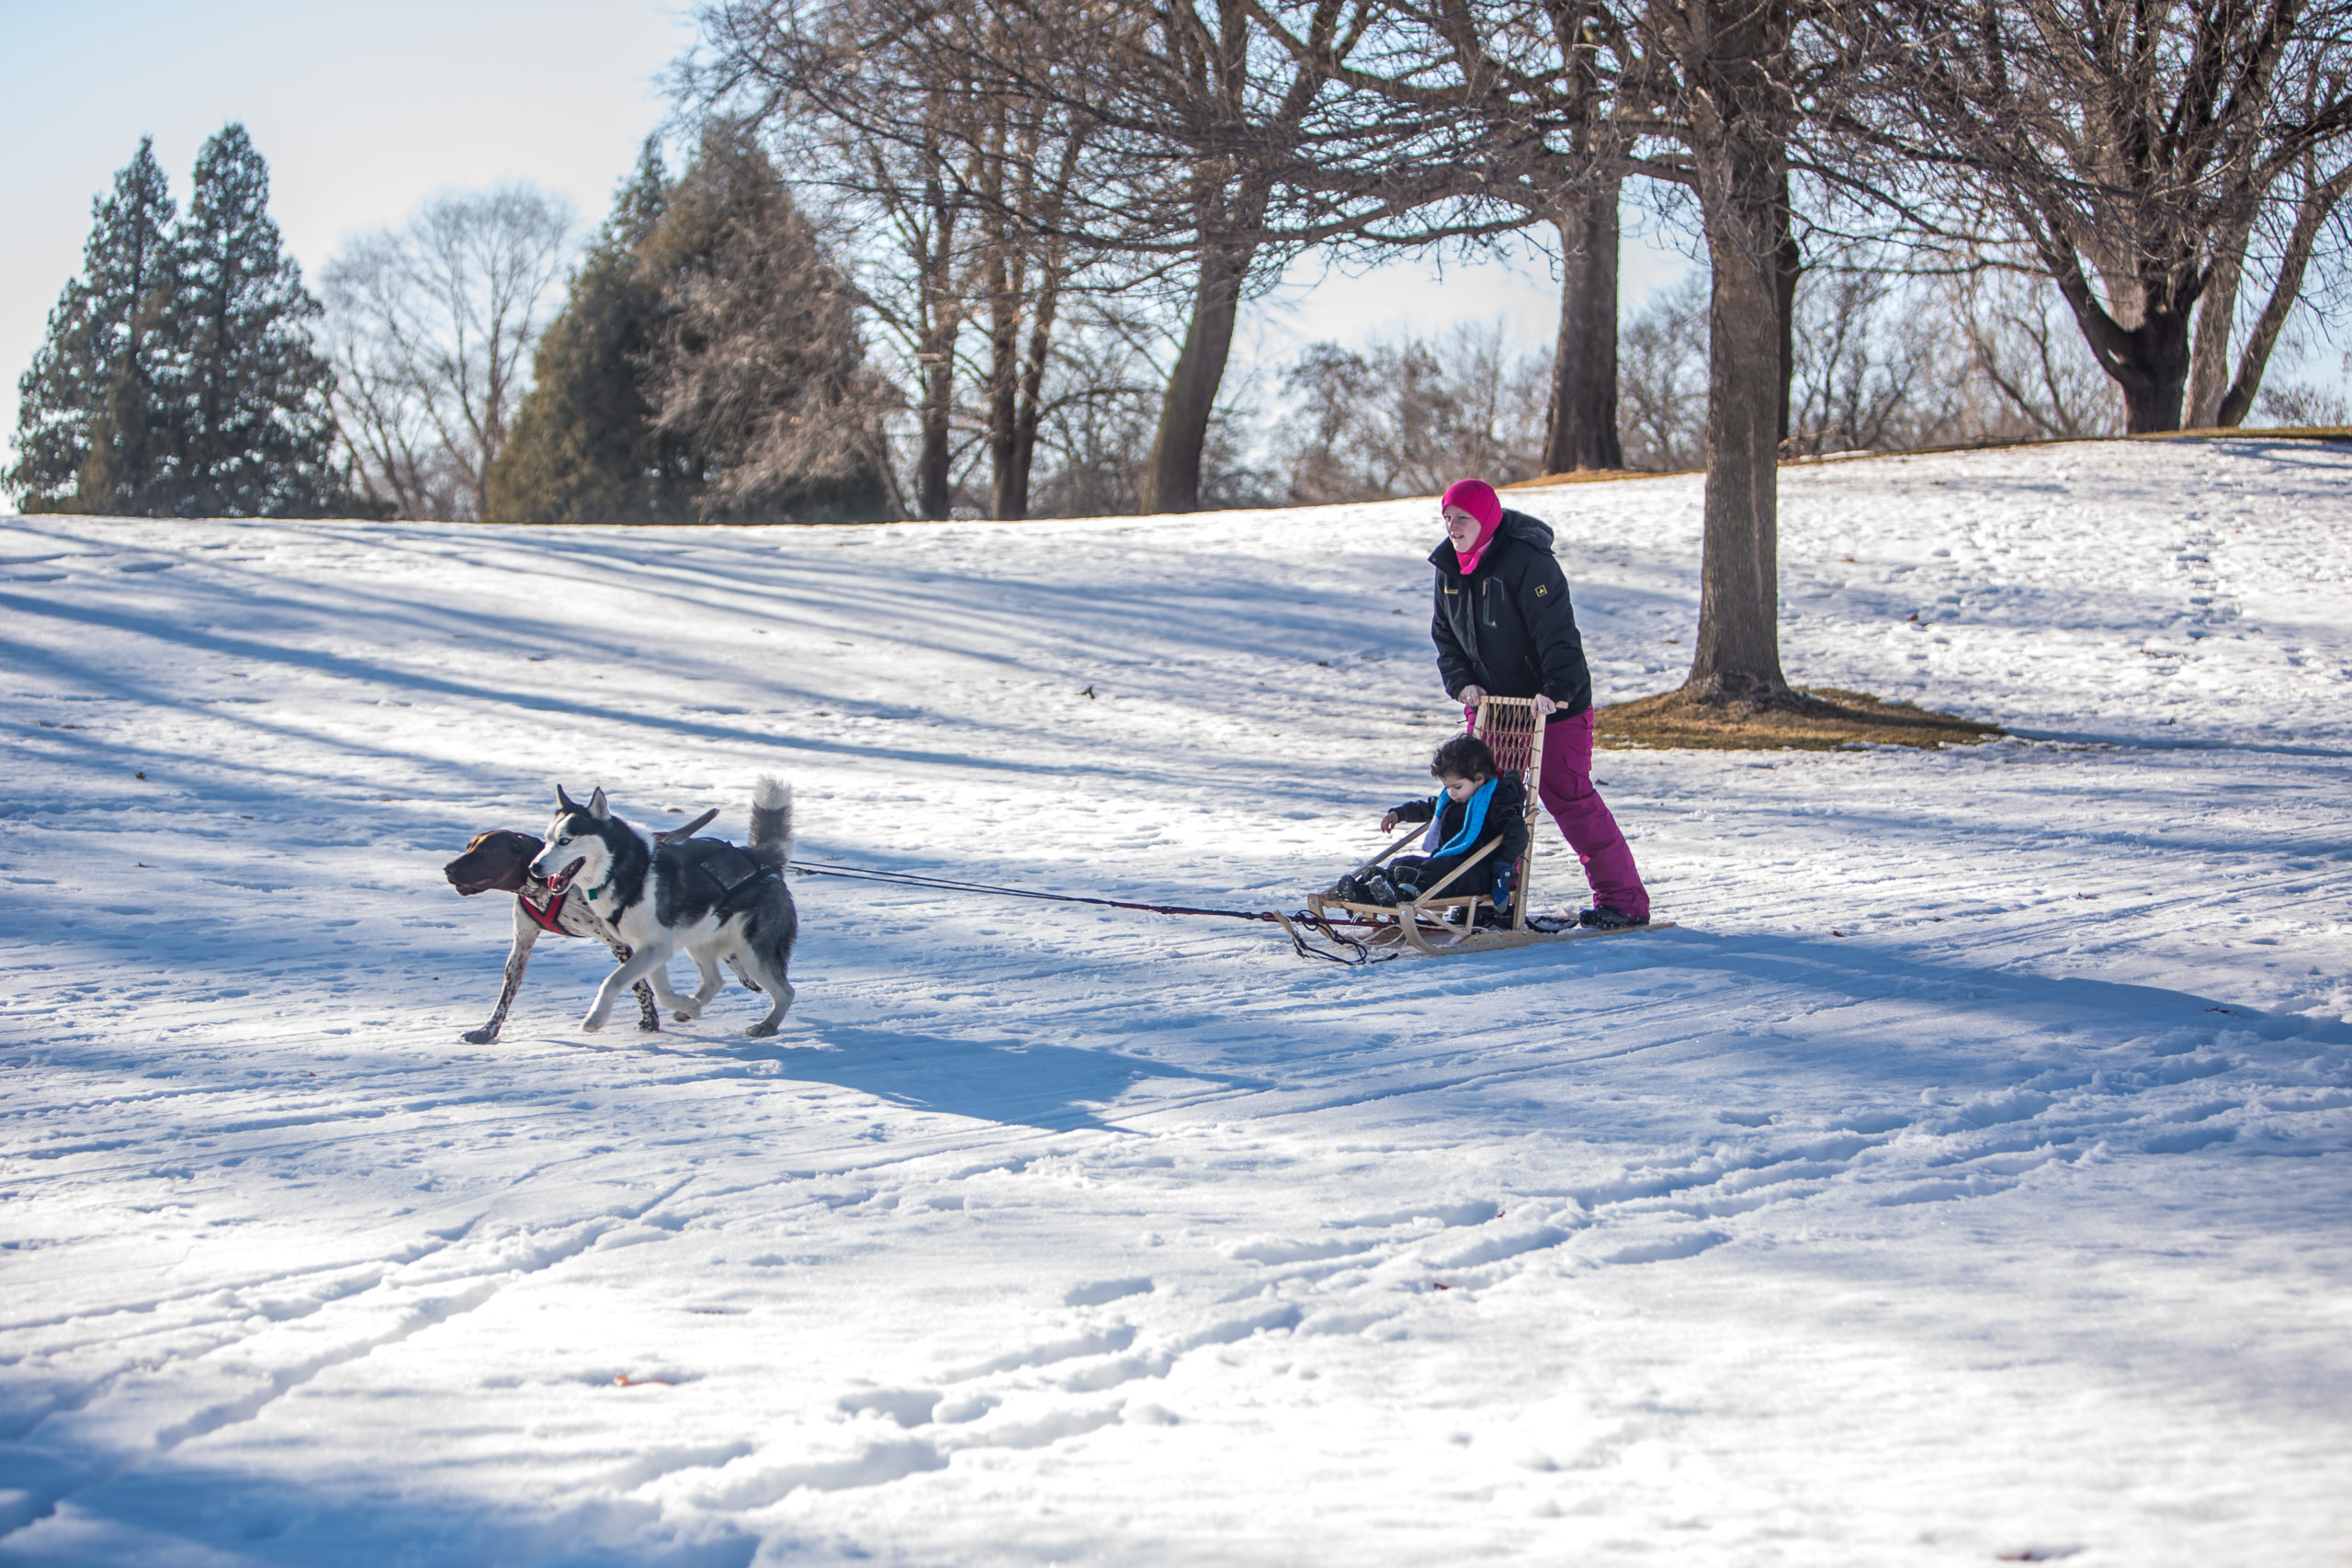 mom dog-sledding with young child at Brookview